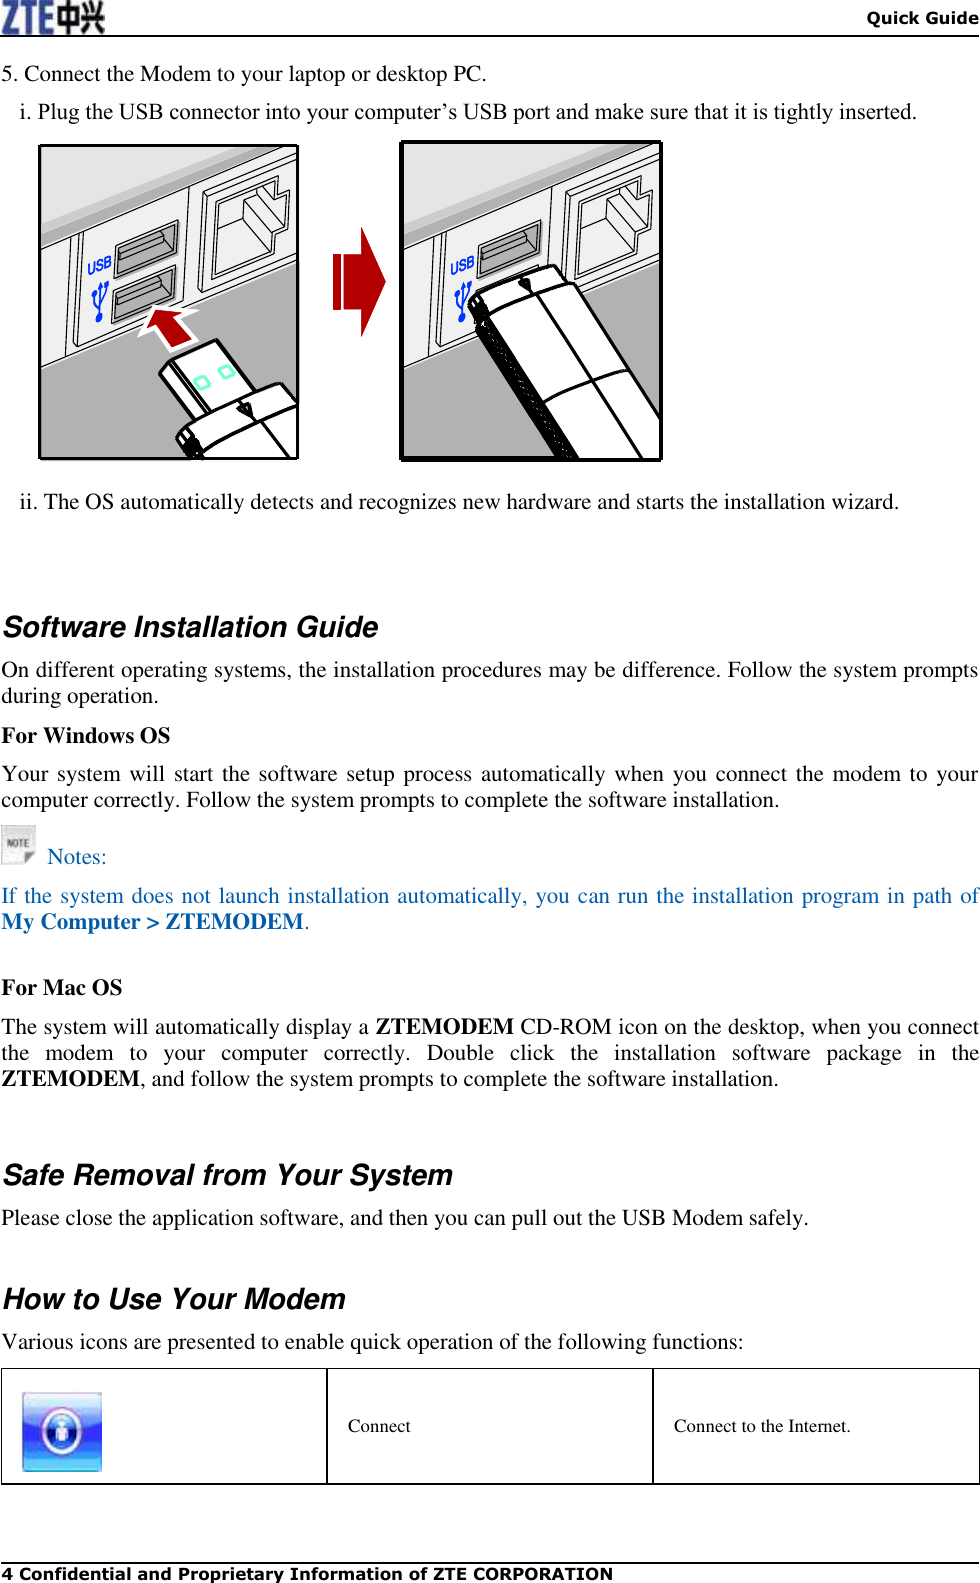  Quick Guide 4 Confidential and Proprietary Information of ZTE CORPORATION 5. Connect the Modem to your laptop or desktop PC. i. Plug the USB connector into your computer’s USB port and make sure that it is tightly inserted.   ii. The OS automatically detects and recognizes new hardware and starts the installation wizard.     Software Installation Guide On different operating systems, the installation procedures may be difference. Follow the system prompts during operation. For Windows OS Your system will start the software setup process automatically when you connect the modem to your computer correctly. Follow the system prompts to complete the software installation.   Notes: If the system does not launch installation automatically, you can run the installation program in path of My Computer &gt; ZTEMODEM.  For Mac OS The system will automatically display a ZTEMODEM CD-ROM icon on the desktop, when you connect the  modem  to  your  computer  correctly.  Double  click  the  installation  software  package  in  the ZTEMODEM, and follow the system prompts to complete the software installation.   Safe Removal from Your System Please close the application software, and then you can pull out the USB Modem safely.  How to Use Your Modem Various icons are presented to enable quick operation of the following functions:  Connect Connect to the Internet. 